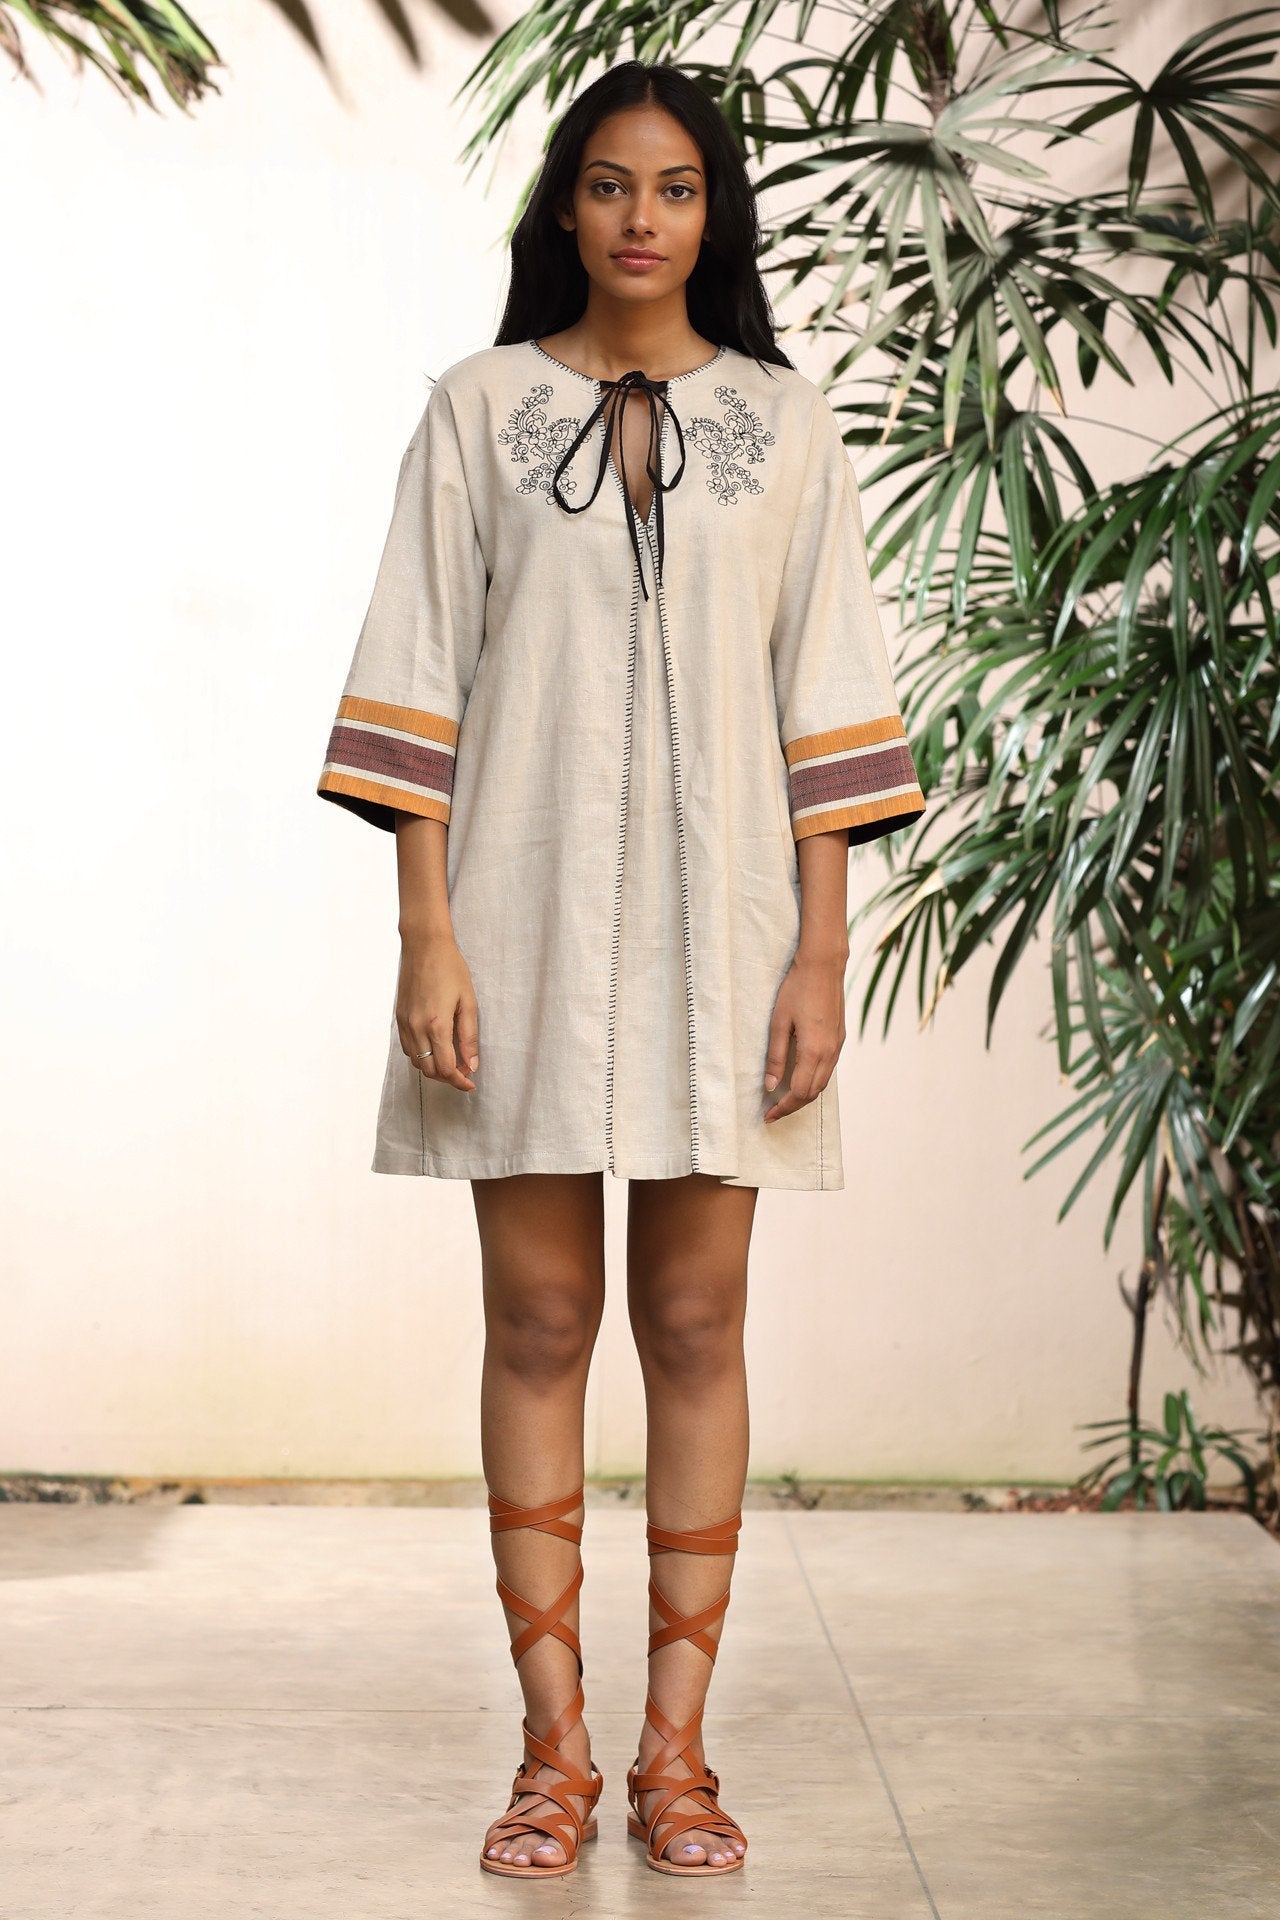 Linen Kurta Mini Dress - Indian Clothing in Denver, CO, Aurora, CO, Boulder, CO, Fort Collins, CO, Colorado Springs, CO, Parker, CO, Highlands Ranch, CO, Cherry Creek, CO, Centennial, CO, and Longmont, CO. Nationwide shipping USA - India Fashion X